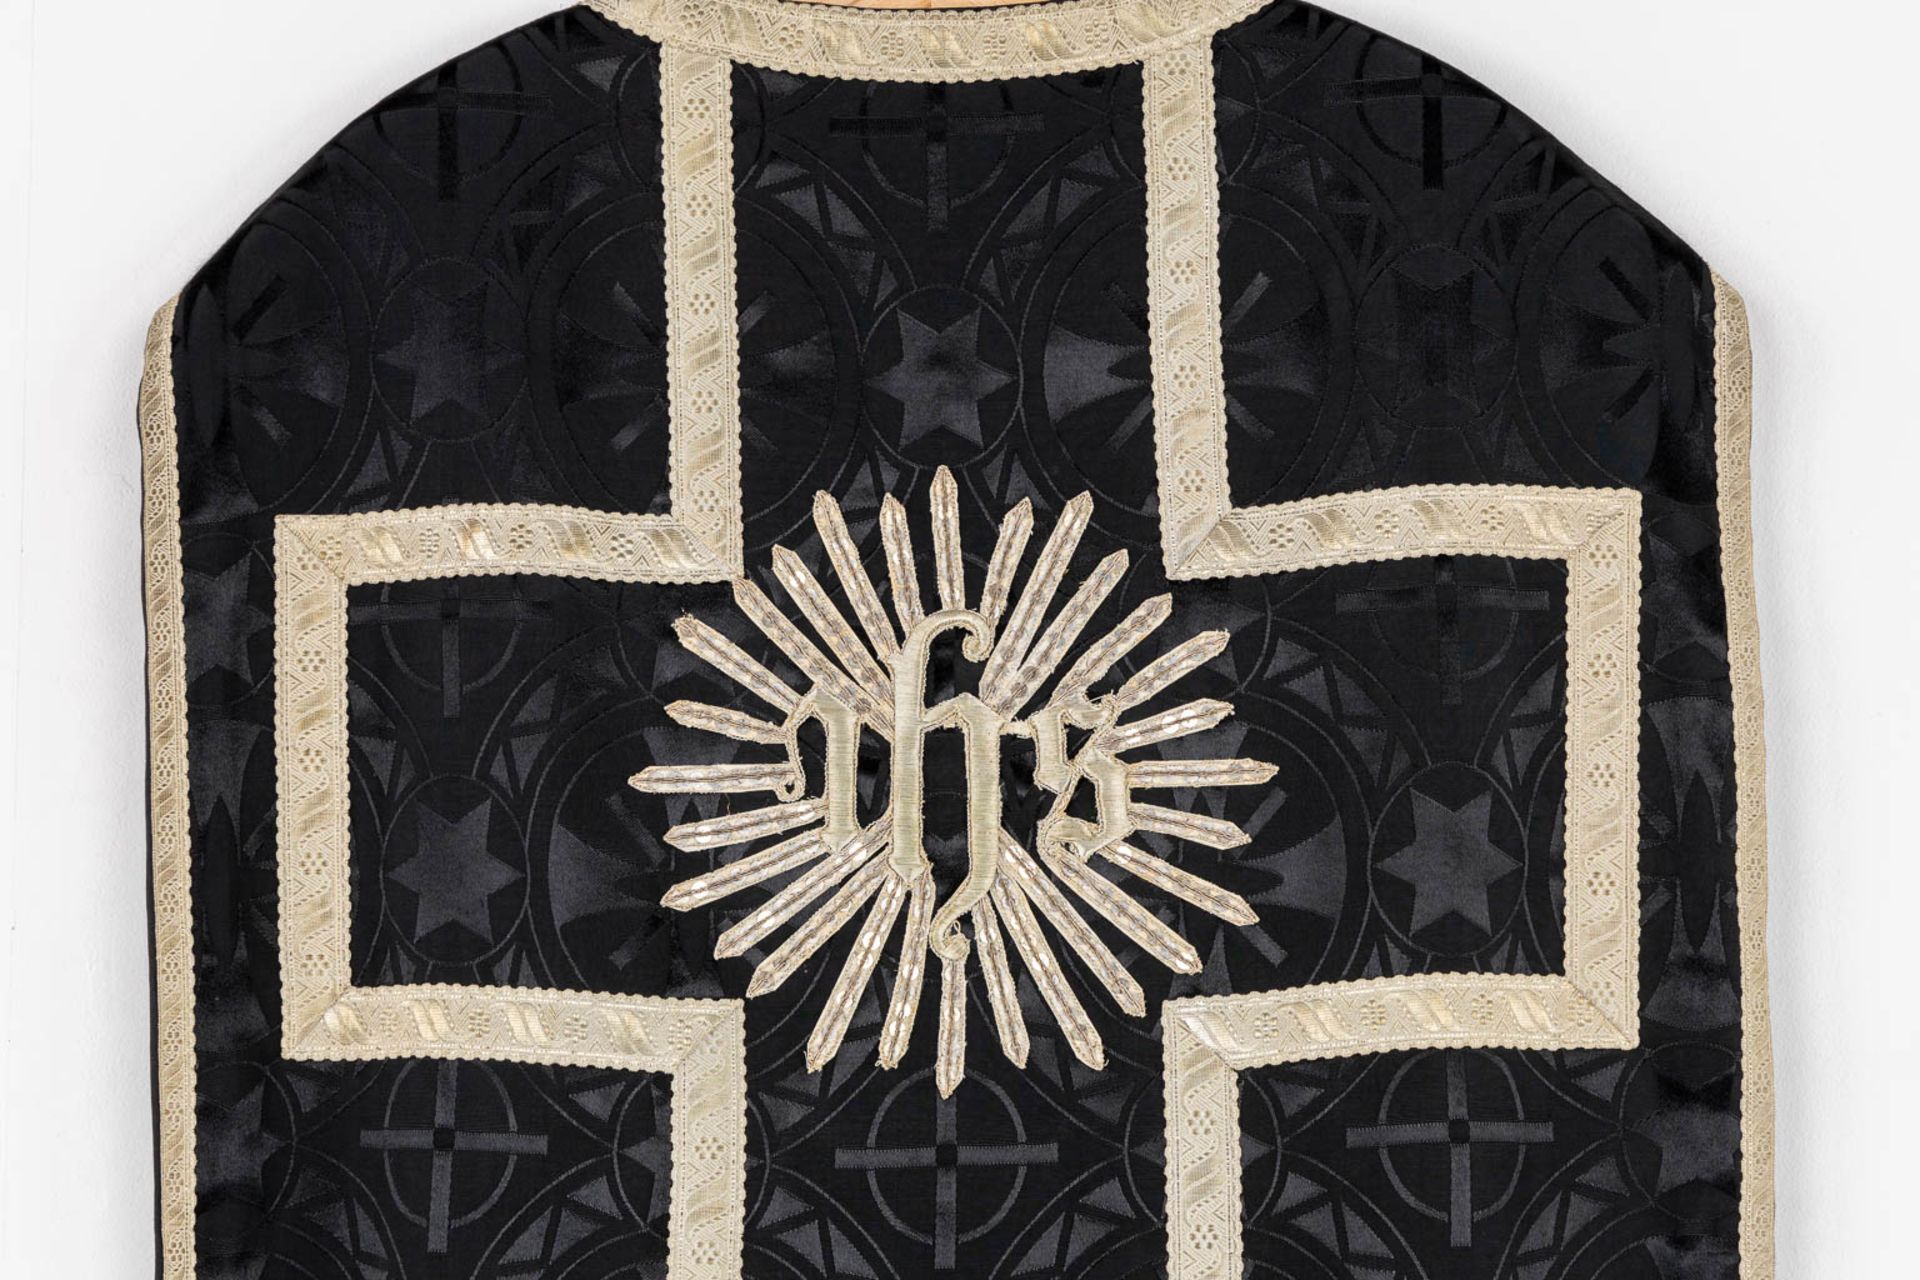 A Cope, Roman Chasuble and Stola, Thick silver brocade embroideries. - Image 8 of 13